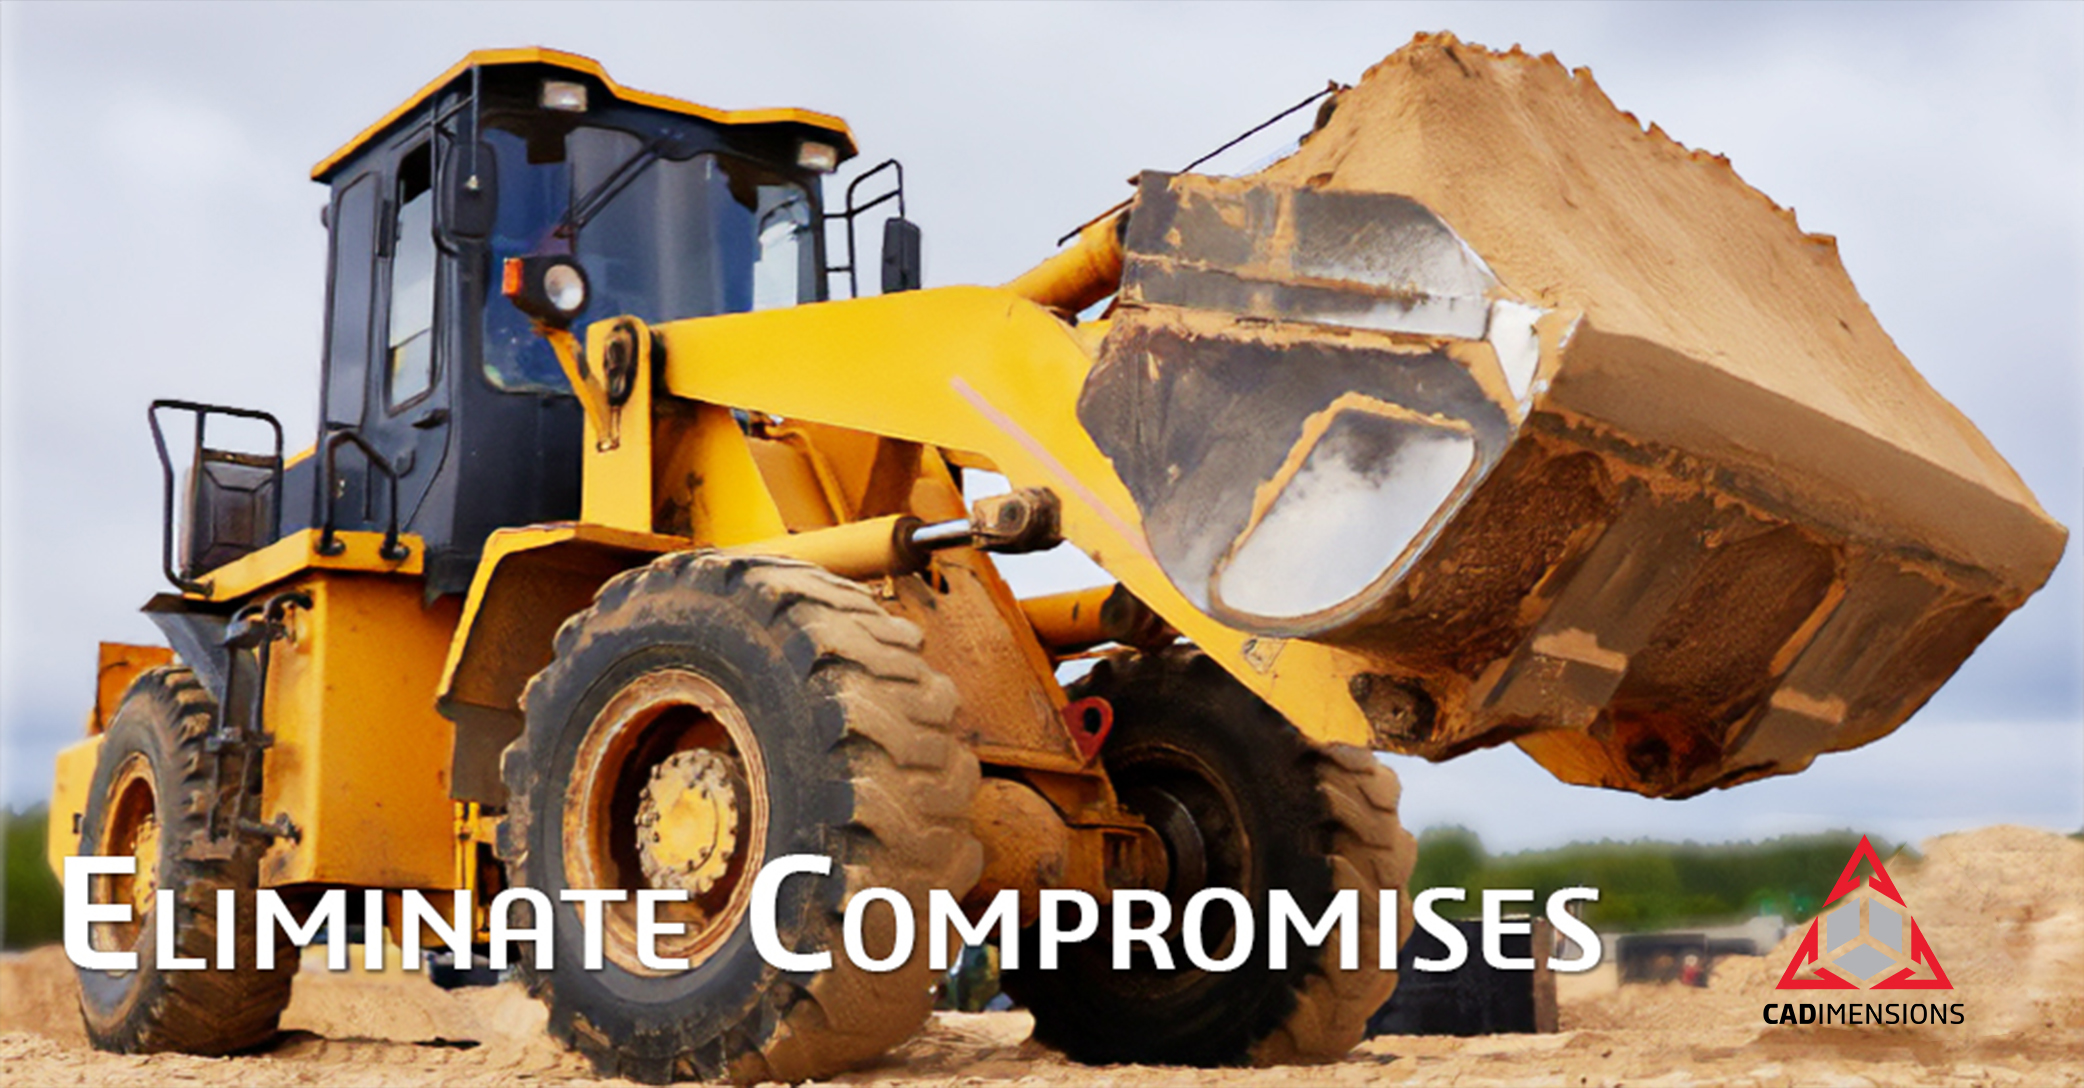 Meet Large-Scale Demands for Heavy Equipment Manufacturers